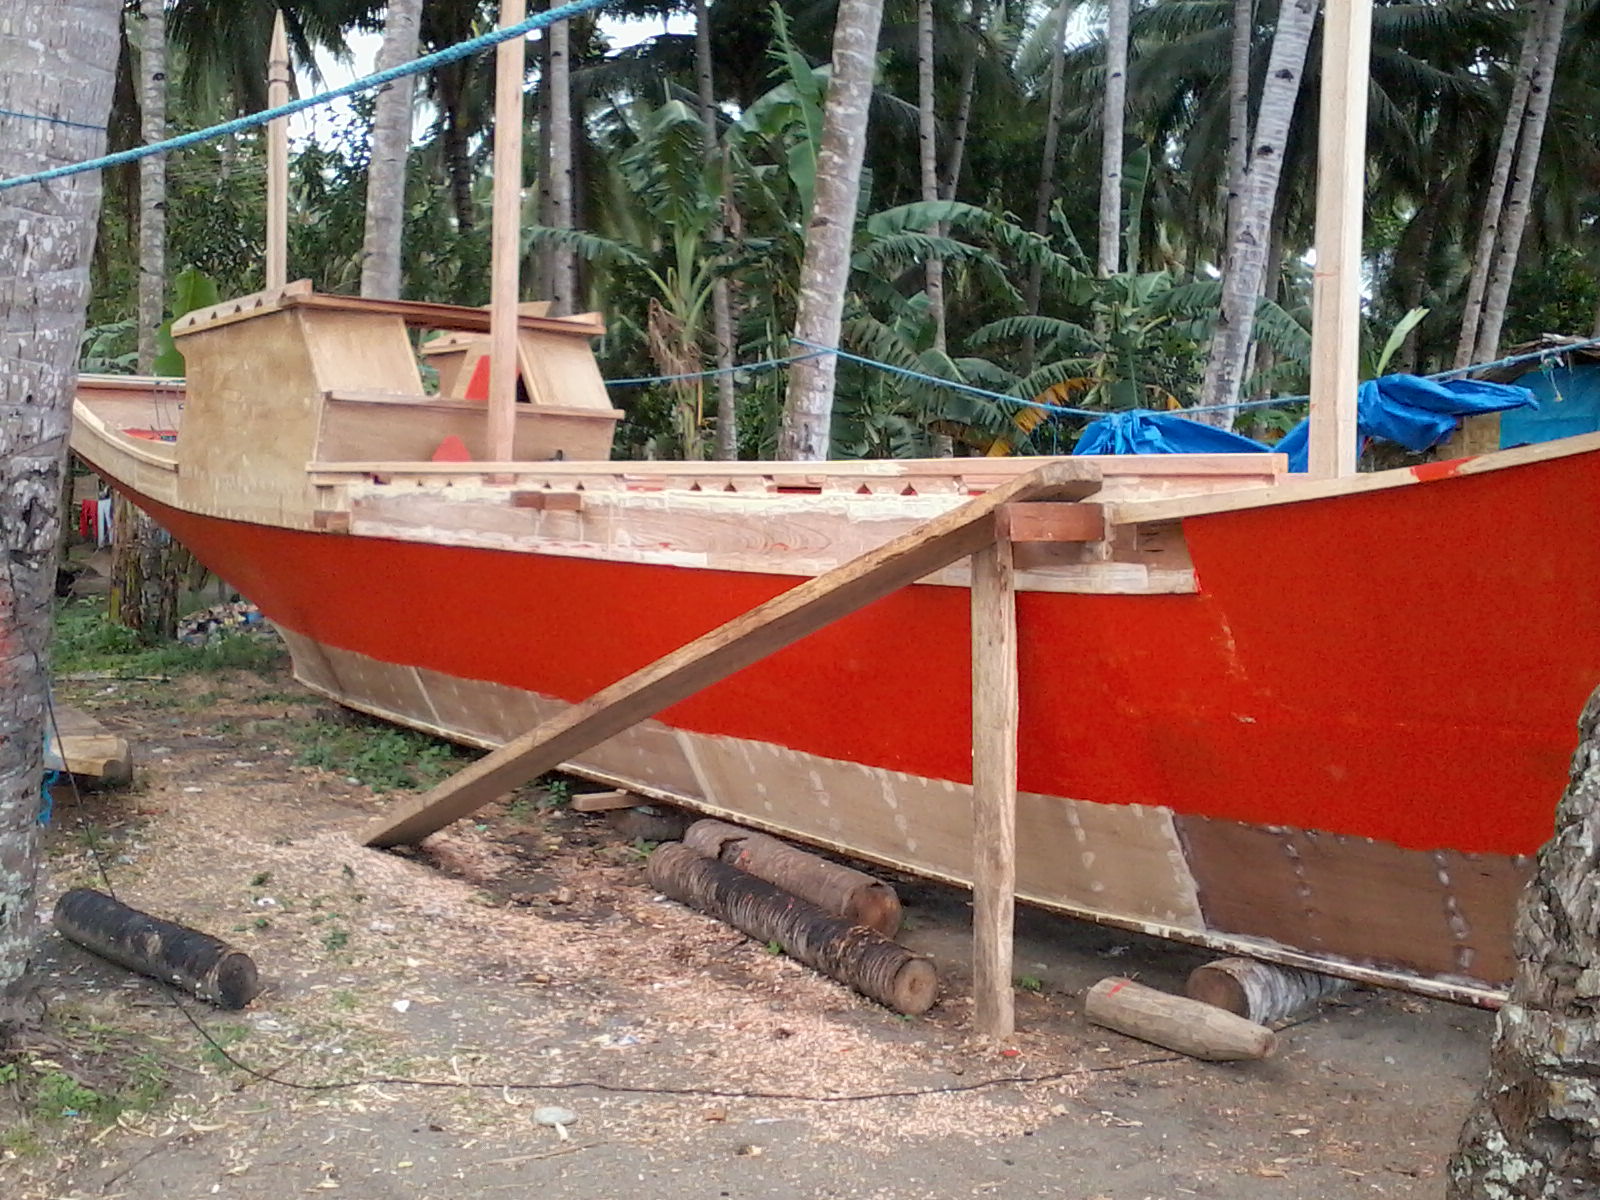 philippine tuna fishing: what kind of plywood works best